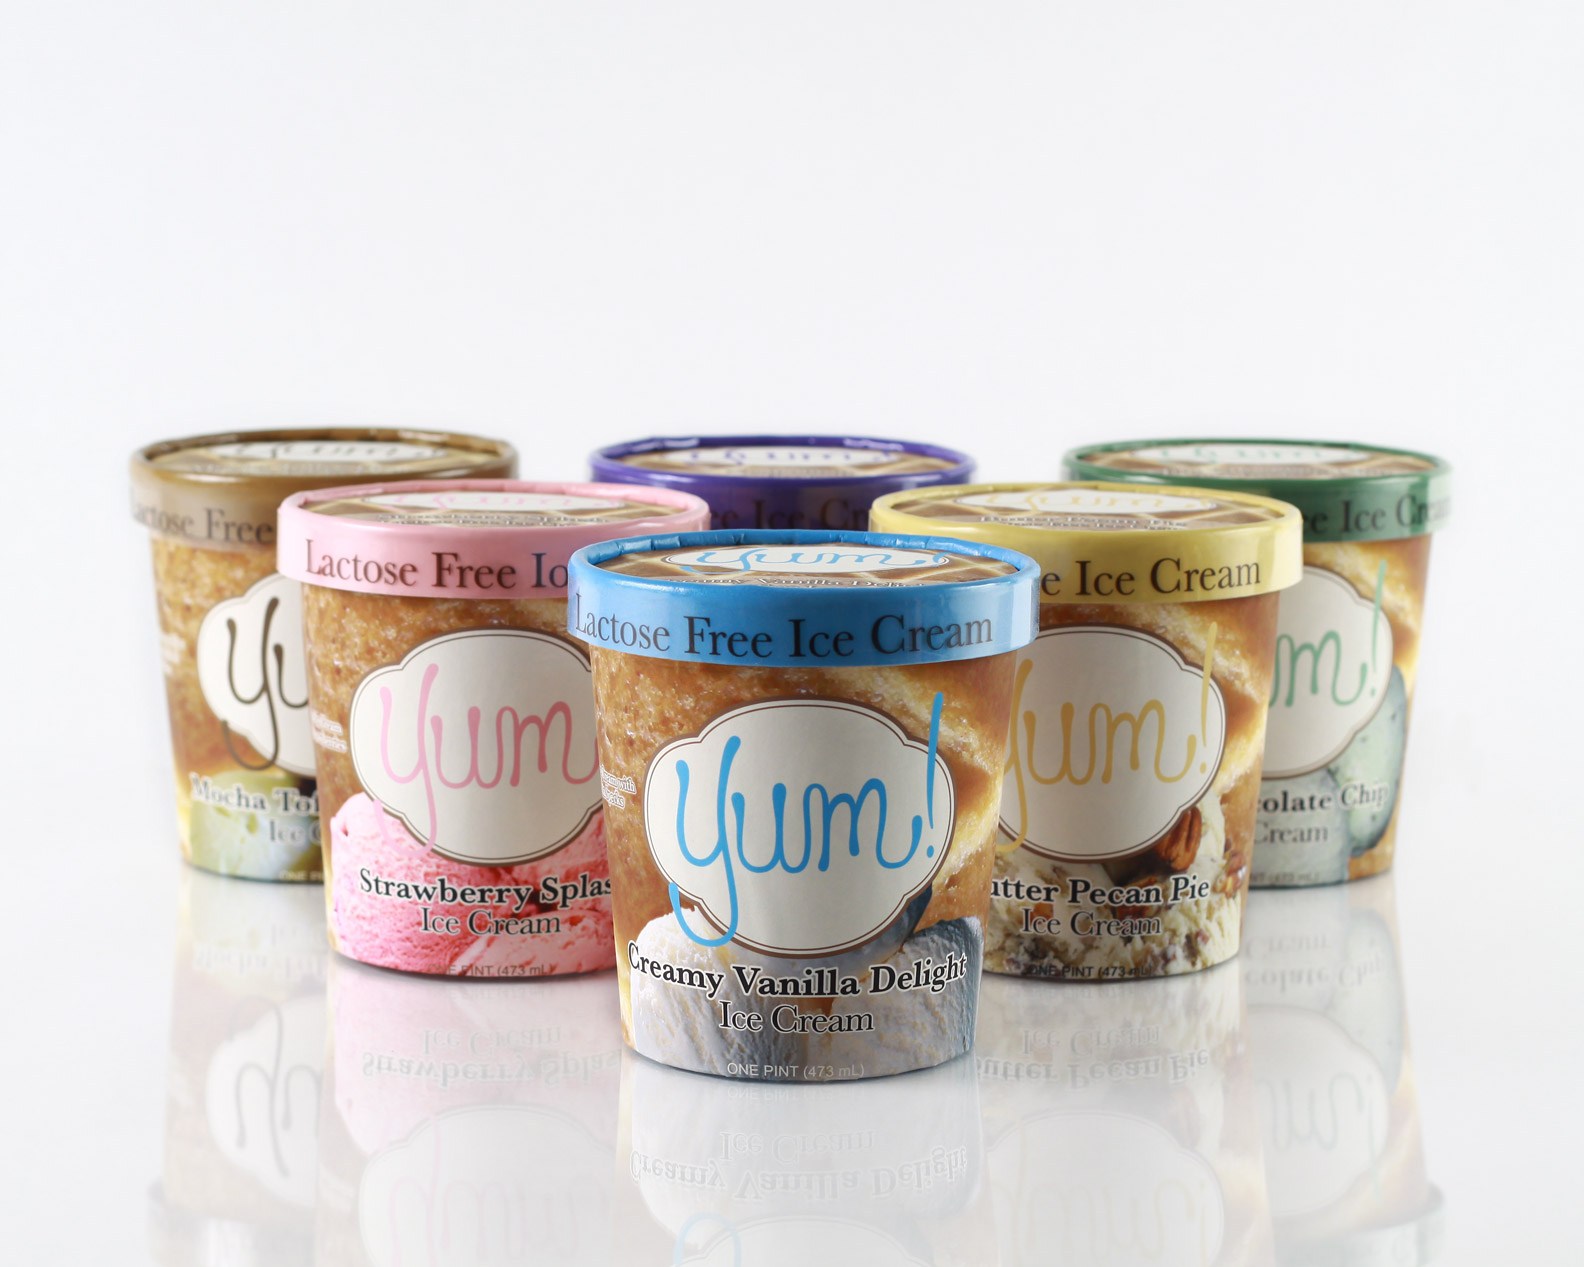 6 Pint Sized Ice Cream containers arranged in a triangle, displaying the package design for Yum! Lactose-free Ice Cream